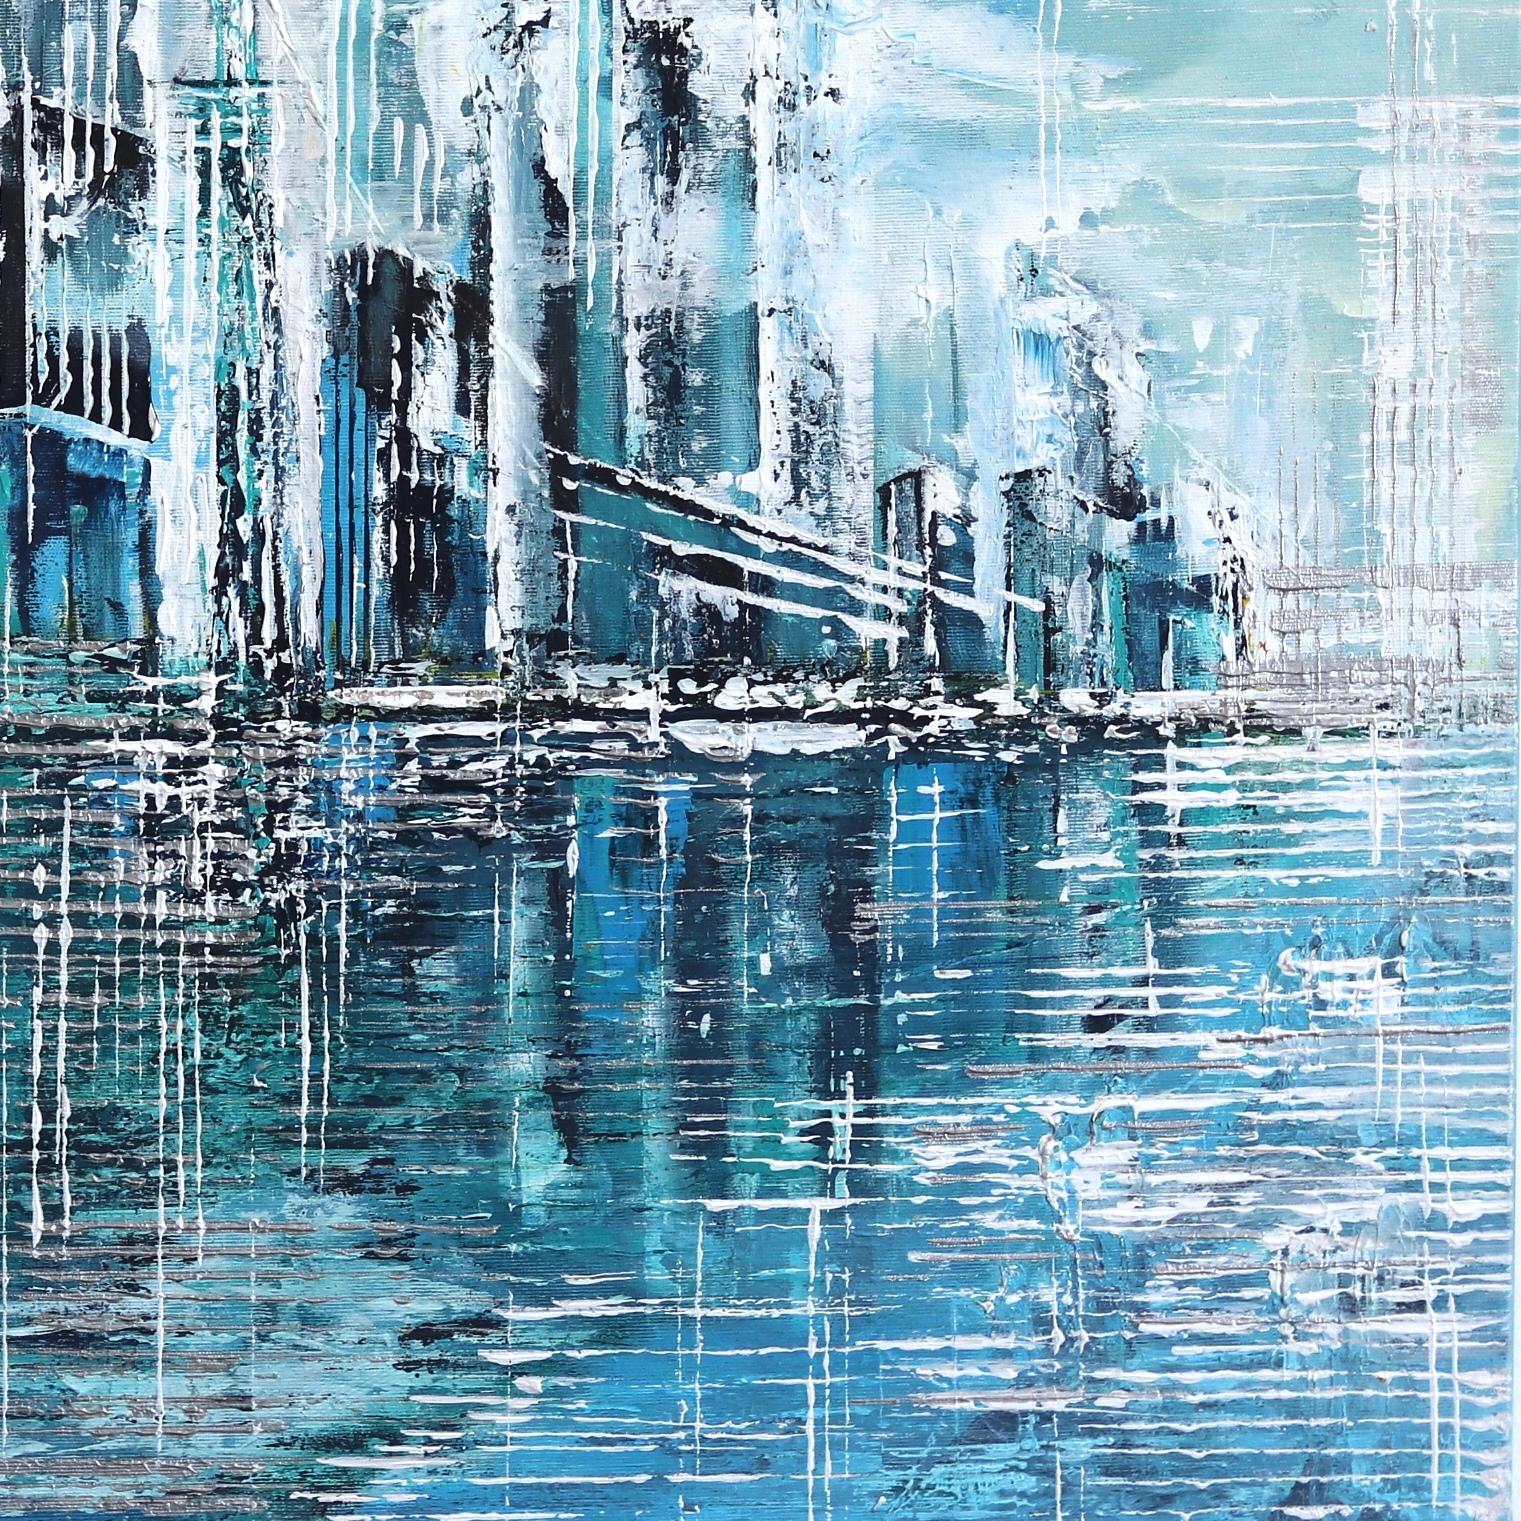 Ivana Milosevic creates vibrant, pulsing cityscapes that emphasize color and texture. She uses palette knives and bushes to carve building structures into layers of paint. Small shadows of human figures populate her city streets, adding a sense of